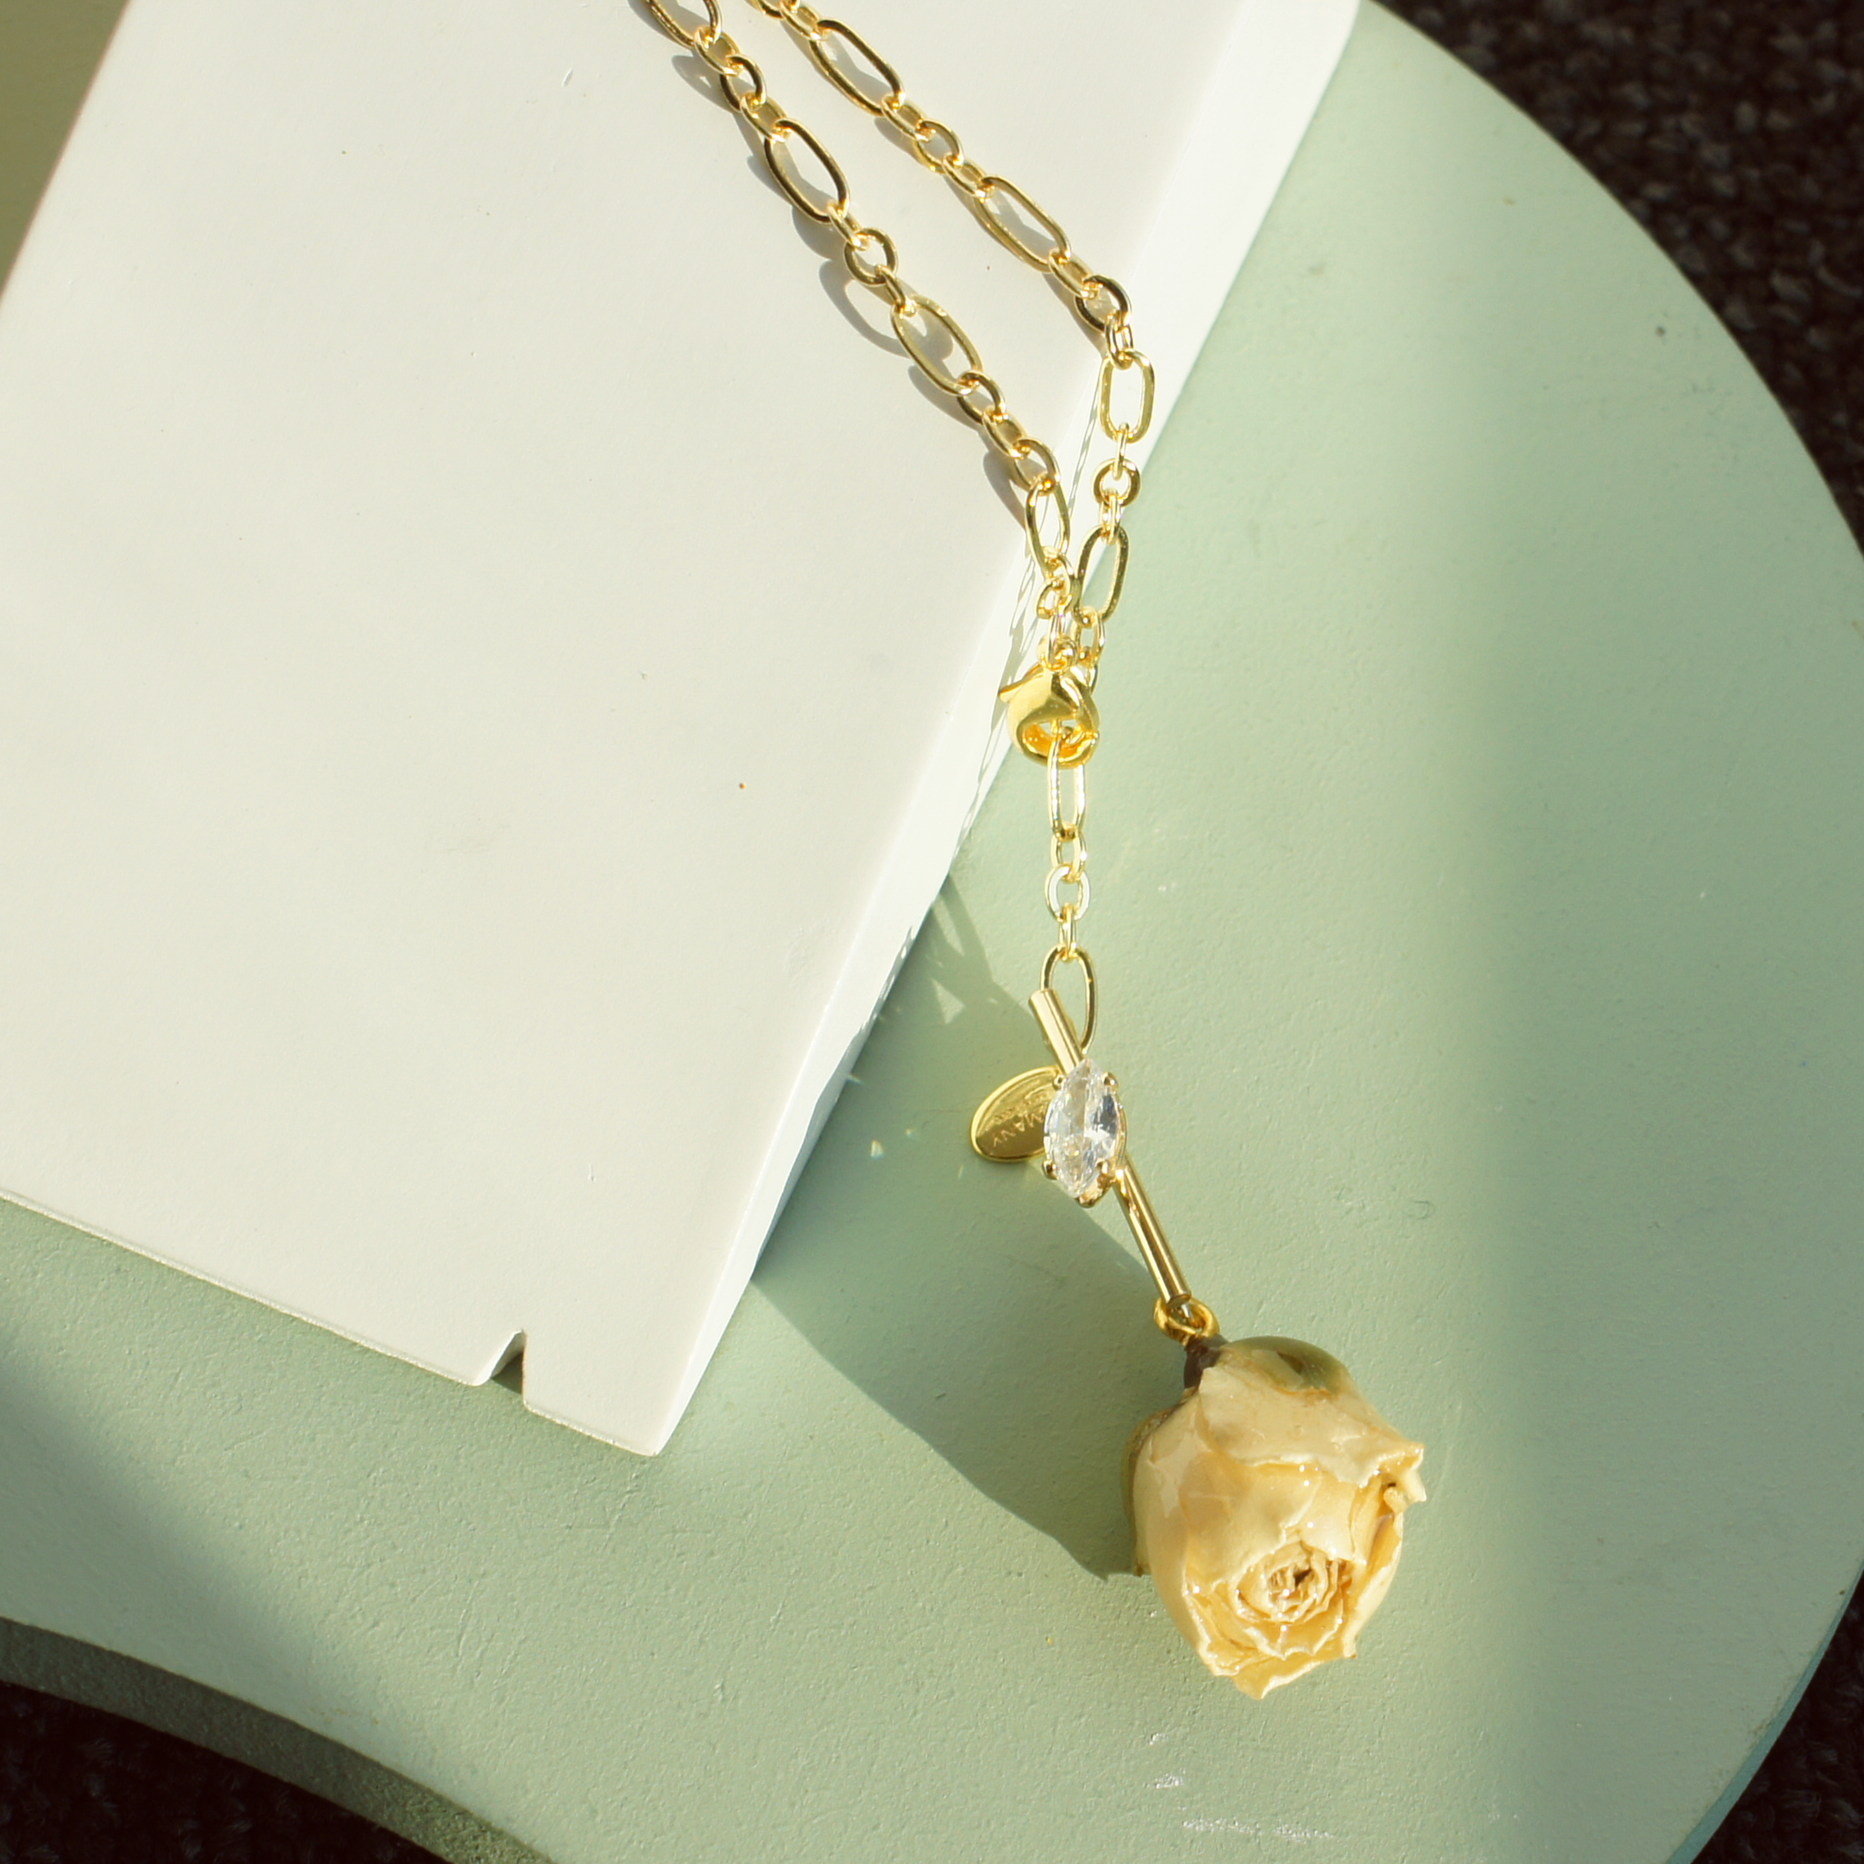 *REAL FLOWER* Rosa Brillante Rosebud Pendant Chain Necklace with Golden Stem and Crystal